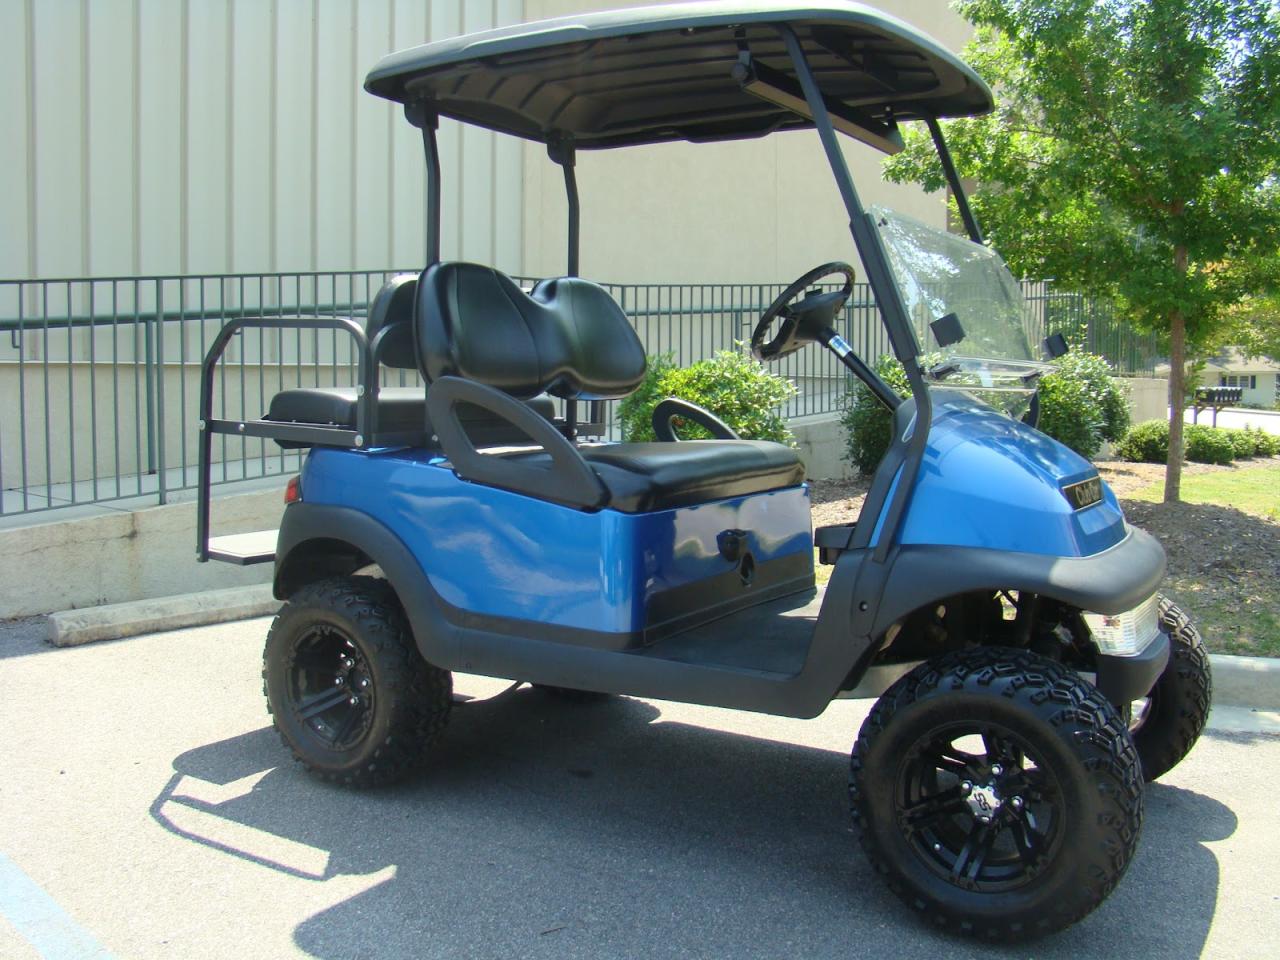 Used Golf Carts for Sale by Owner in Grant, Kansas: Find Your Perfect Ride Today!